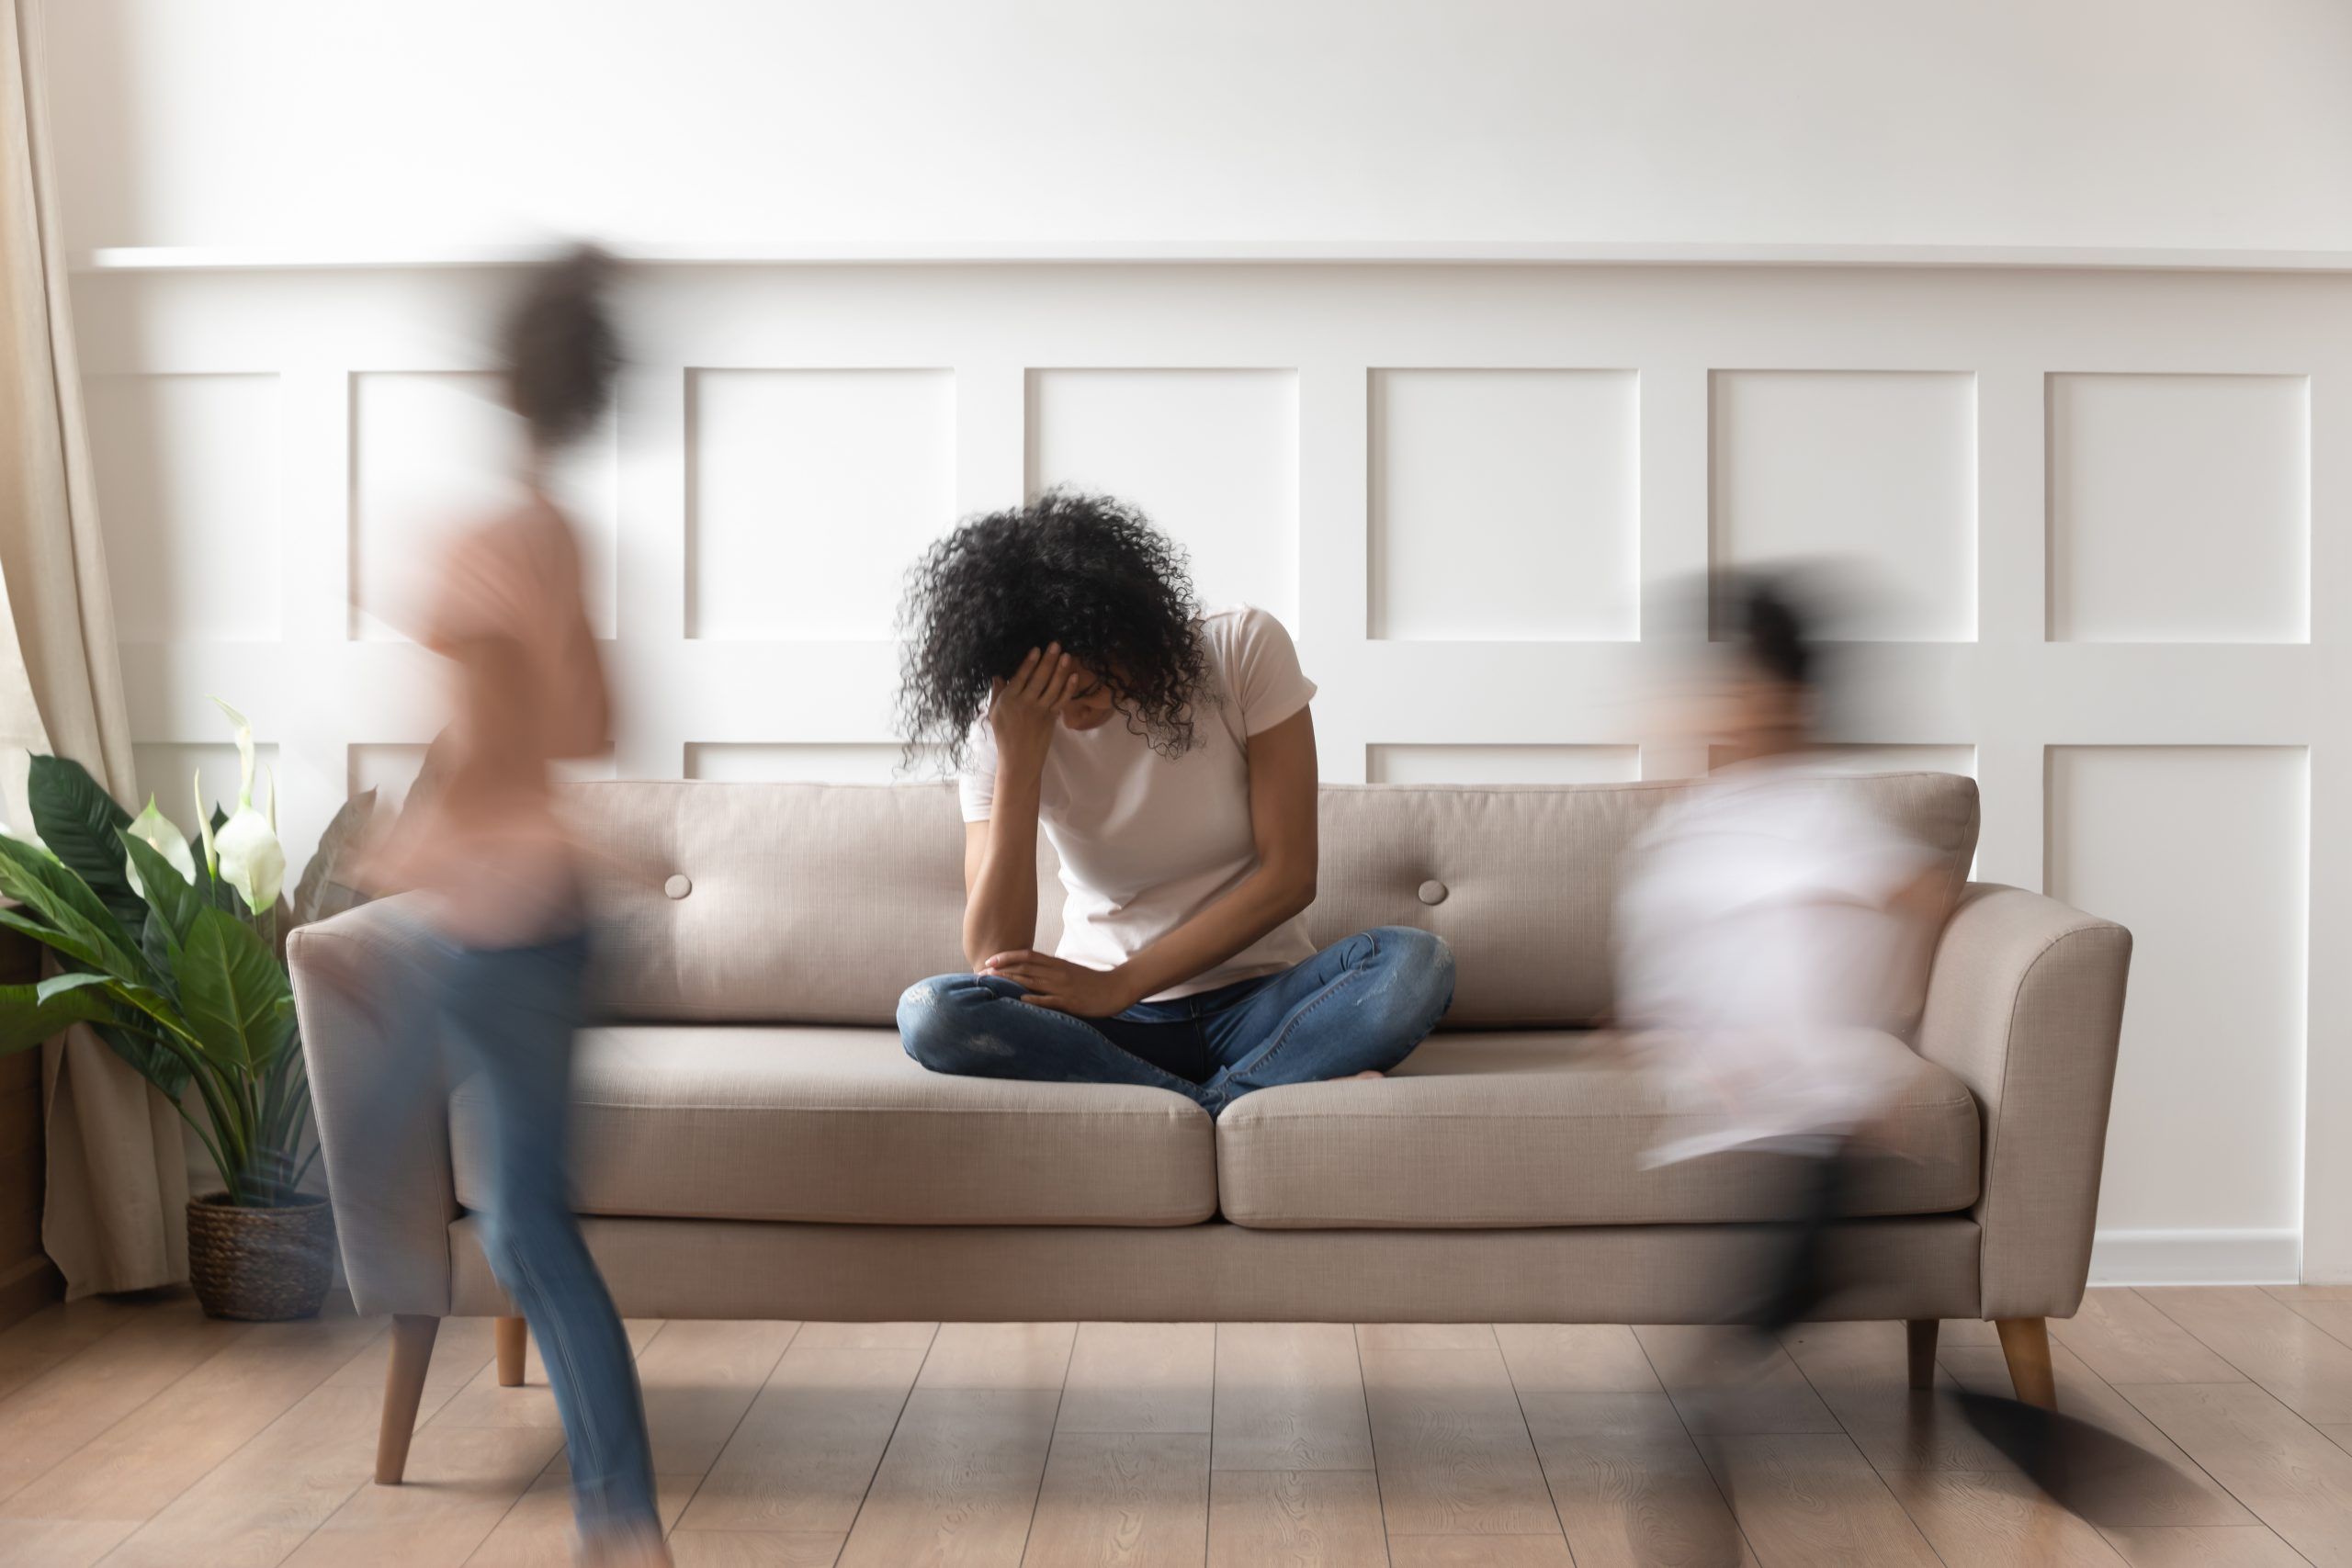 An escalation in parental anxiety and depression during COVID-19 not only affects parents’ mental health, but may also have long-term effects on children.